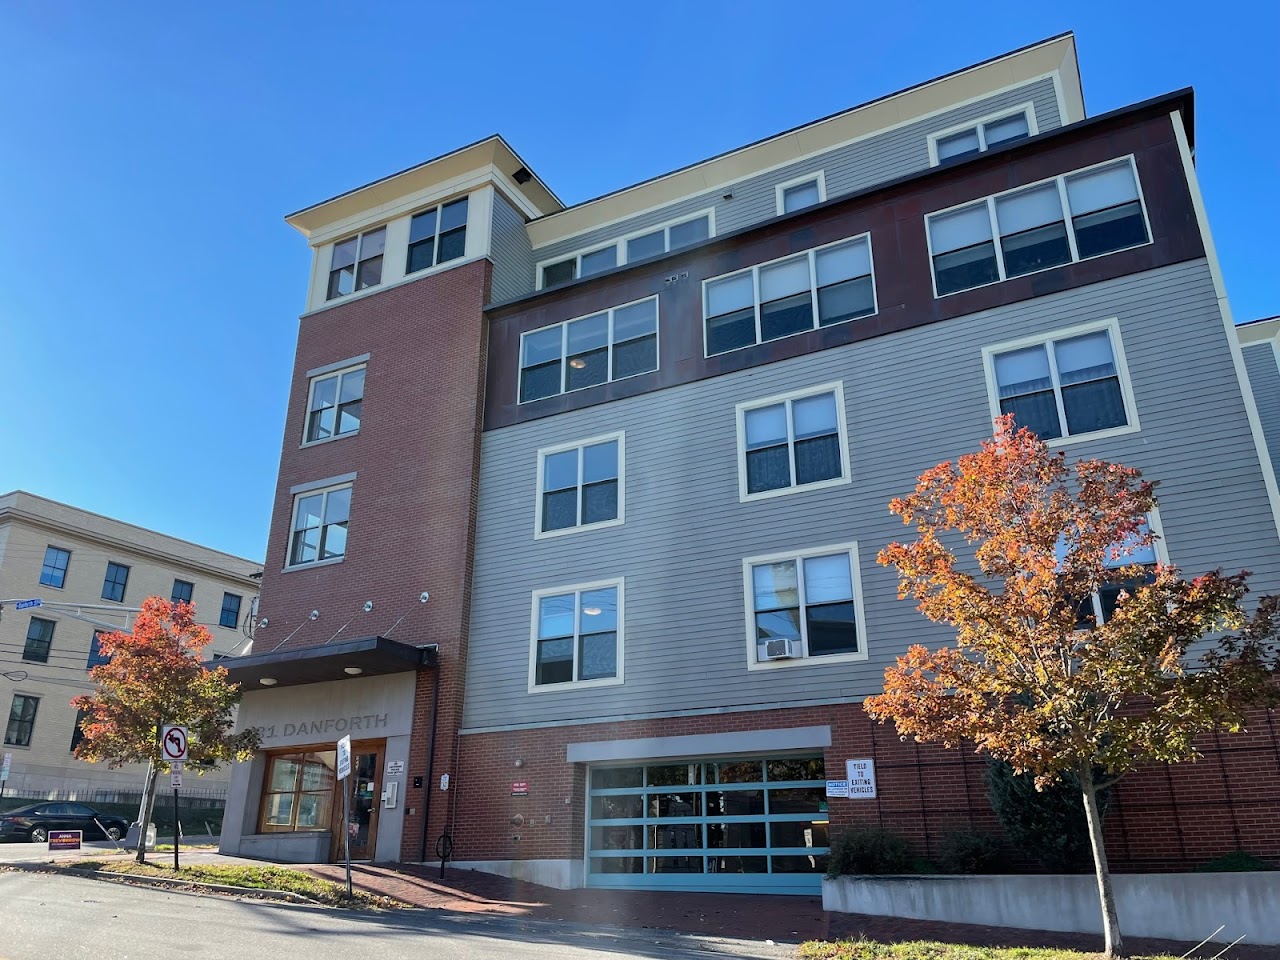 Photo of DANFORTH ON HIGH. Affordable housing located at 81 DANFORTH ST PORTLAND, ME 04101